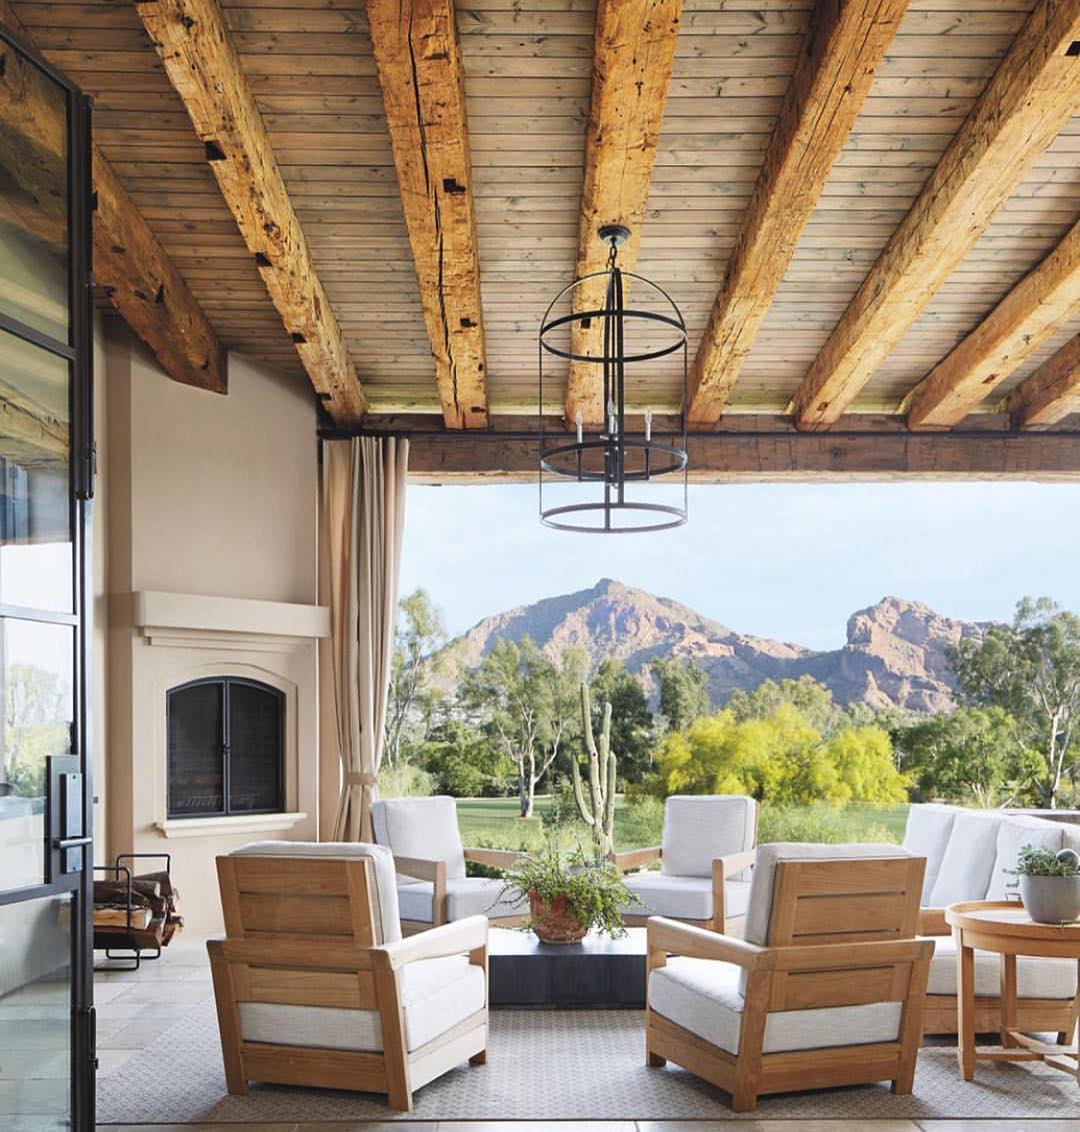 natural wood beams in the ceiling and down the walls with wood seating outside photo by Instagram user @surfacetheory